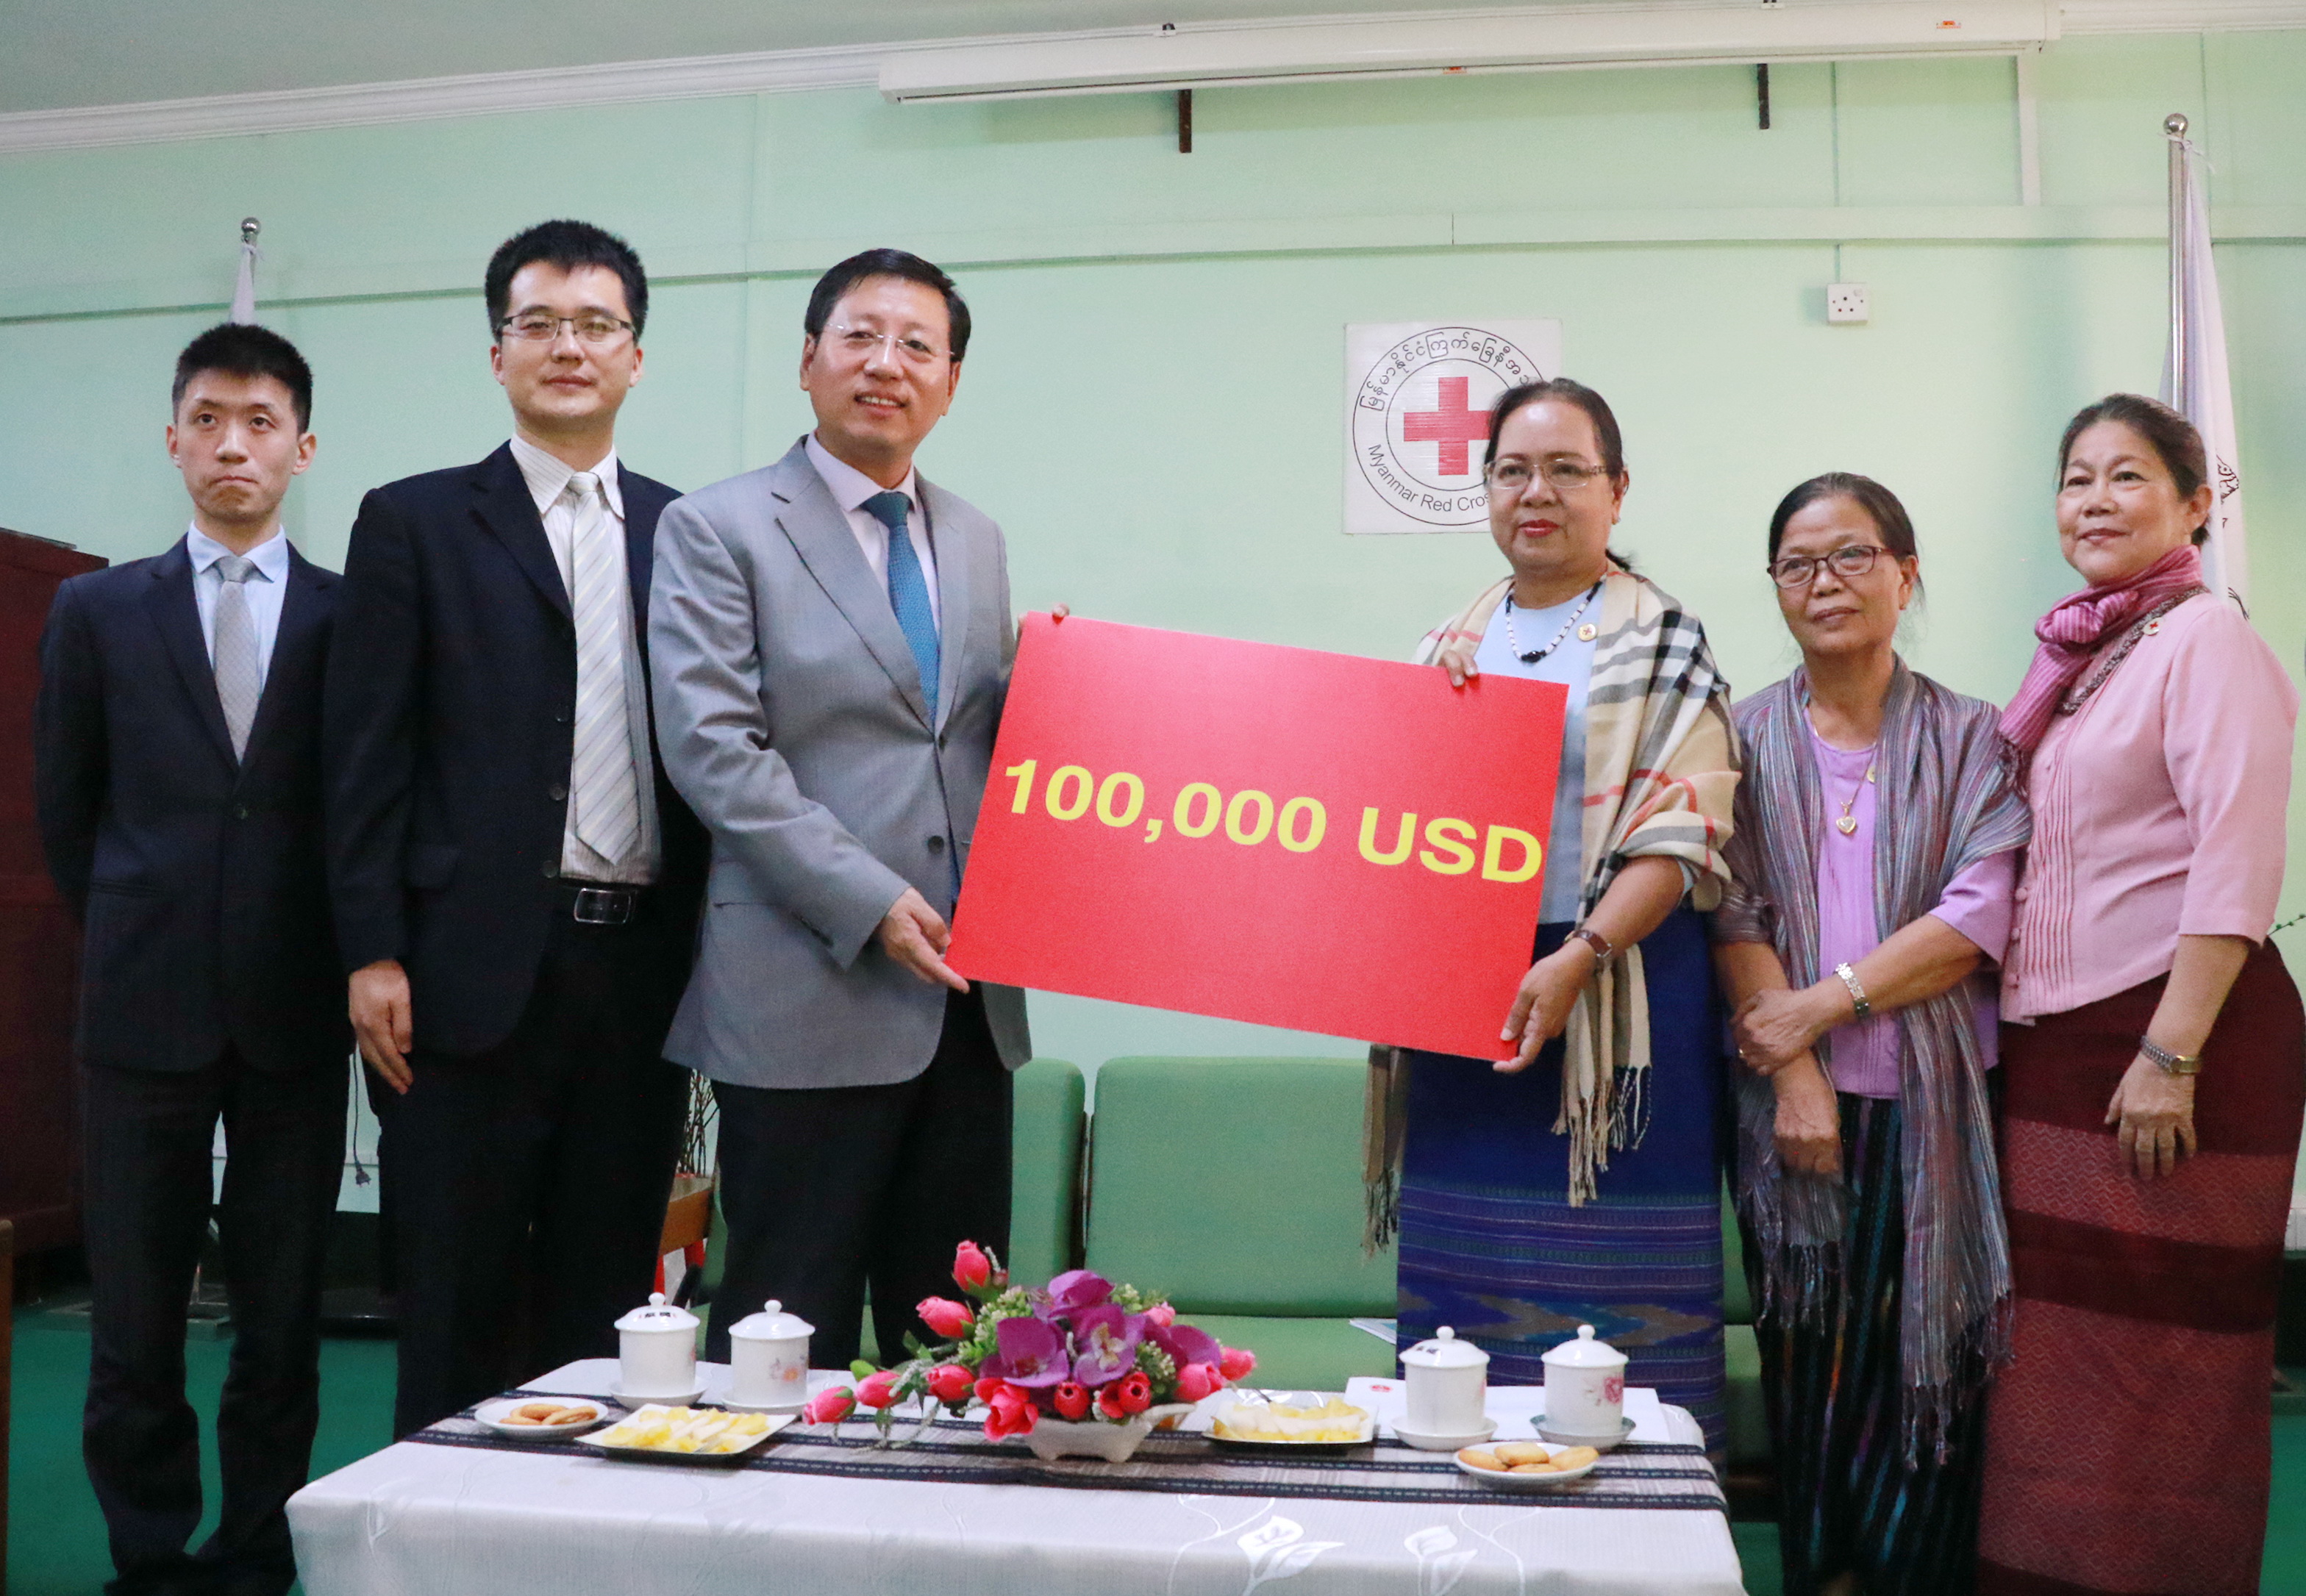 Chinese Ambassador to Myanmar Hong Liang (third from left) handing over the $100,000 provided by the RCSC for emergency flood relief in Myanmar to  Dr. Mya Thu (third from right), Chairwoman of the RSCM, on Monday, August 7th, 2017. [Photo: China Plus/Tu Yun]